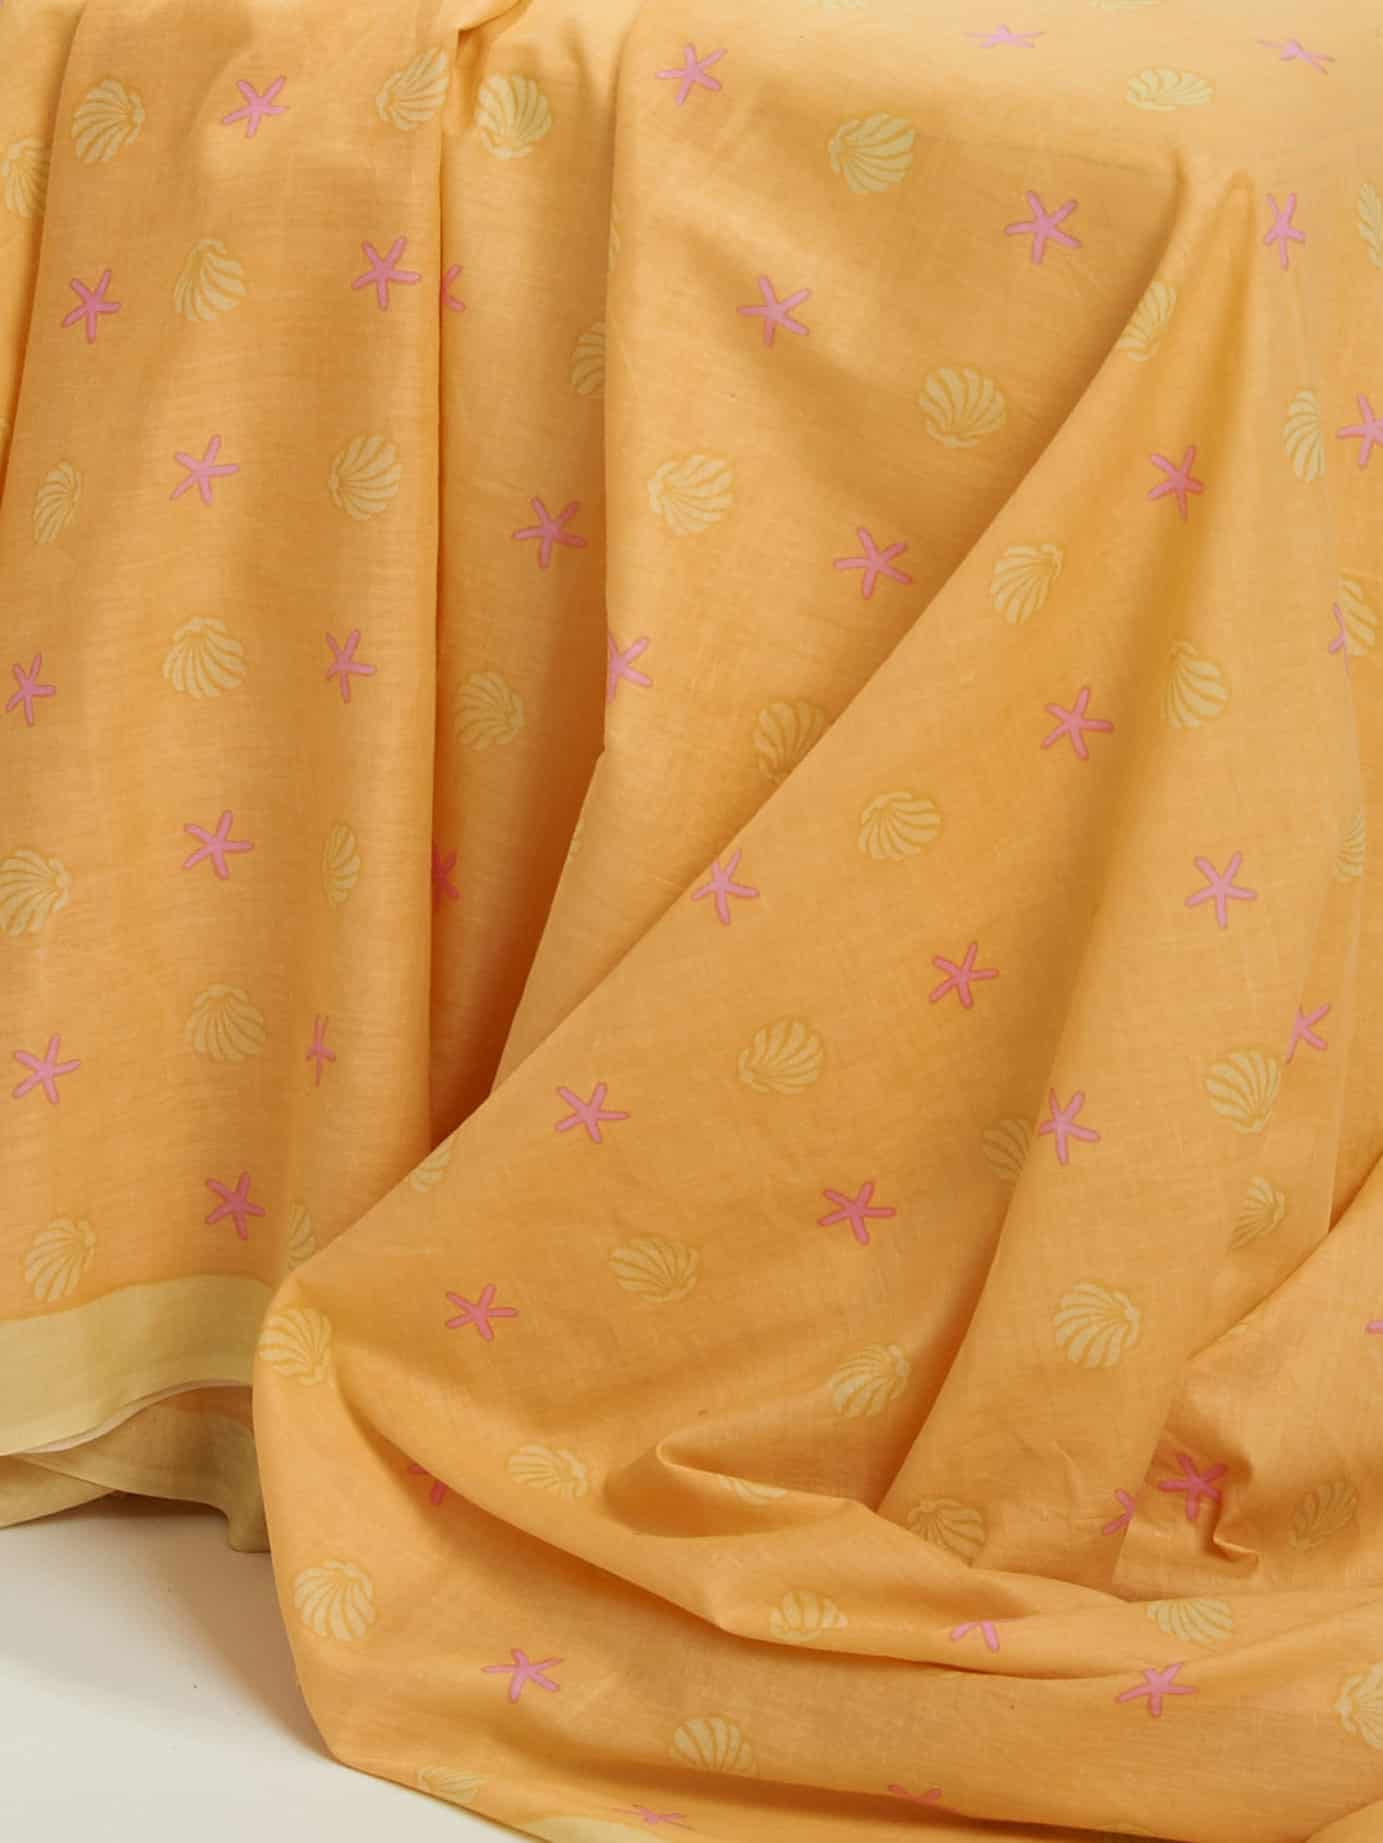 pink starfish and shells on a delicate orange back ground100% cotton sarong plus 2.1 meters long on light weight Indian cotton voile t2.1 meters long.